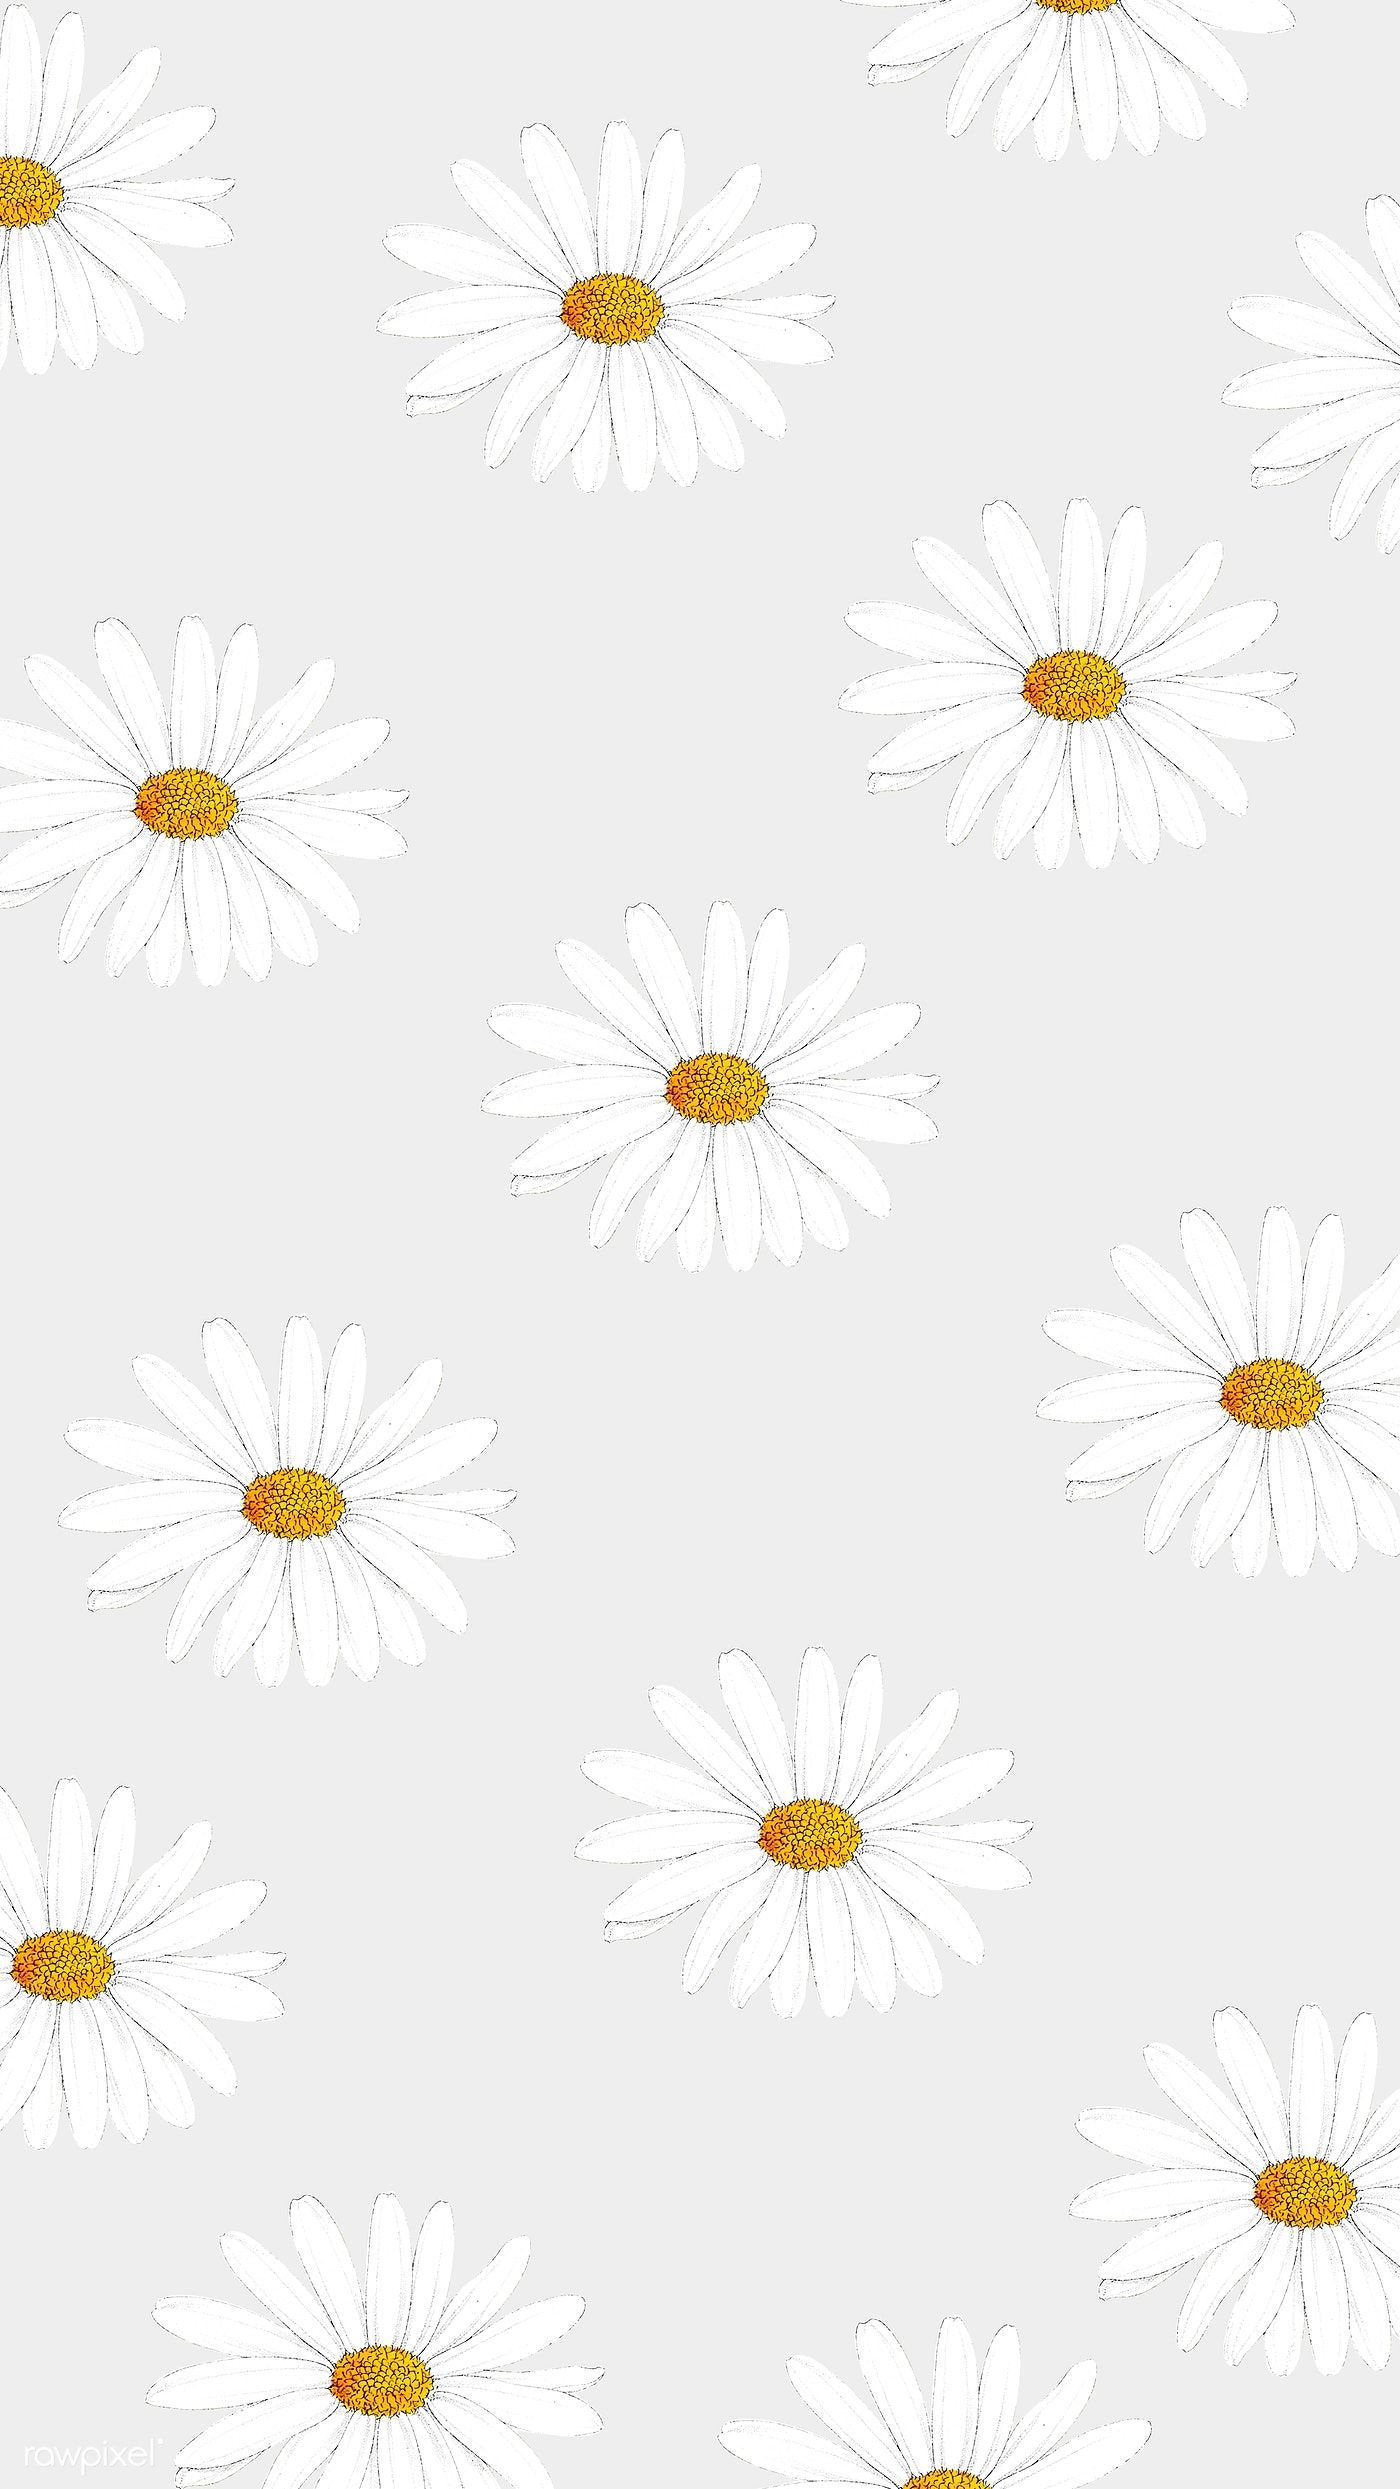 Daisy Aesthetic Wallpapers - Wallpaper Cave